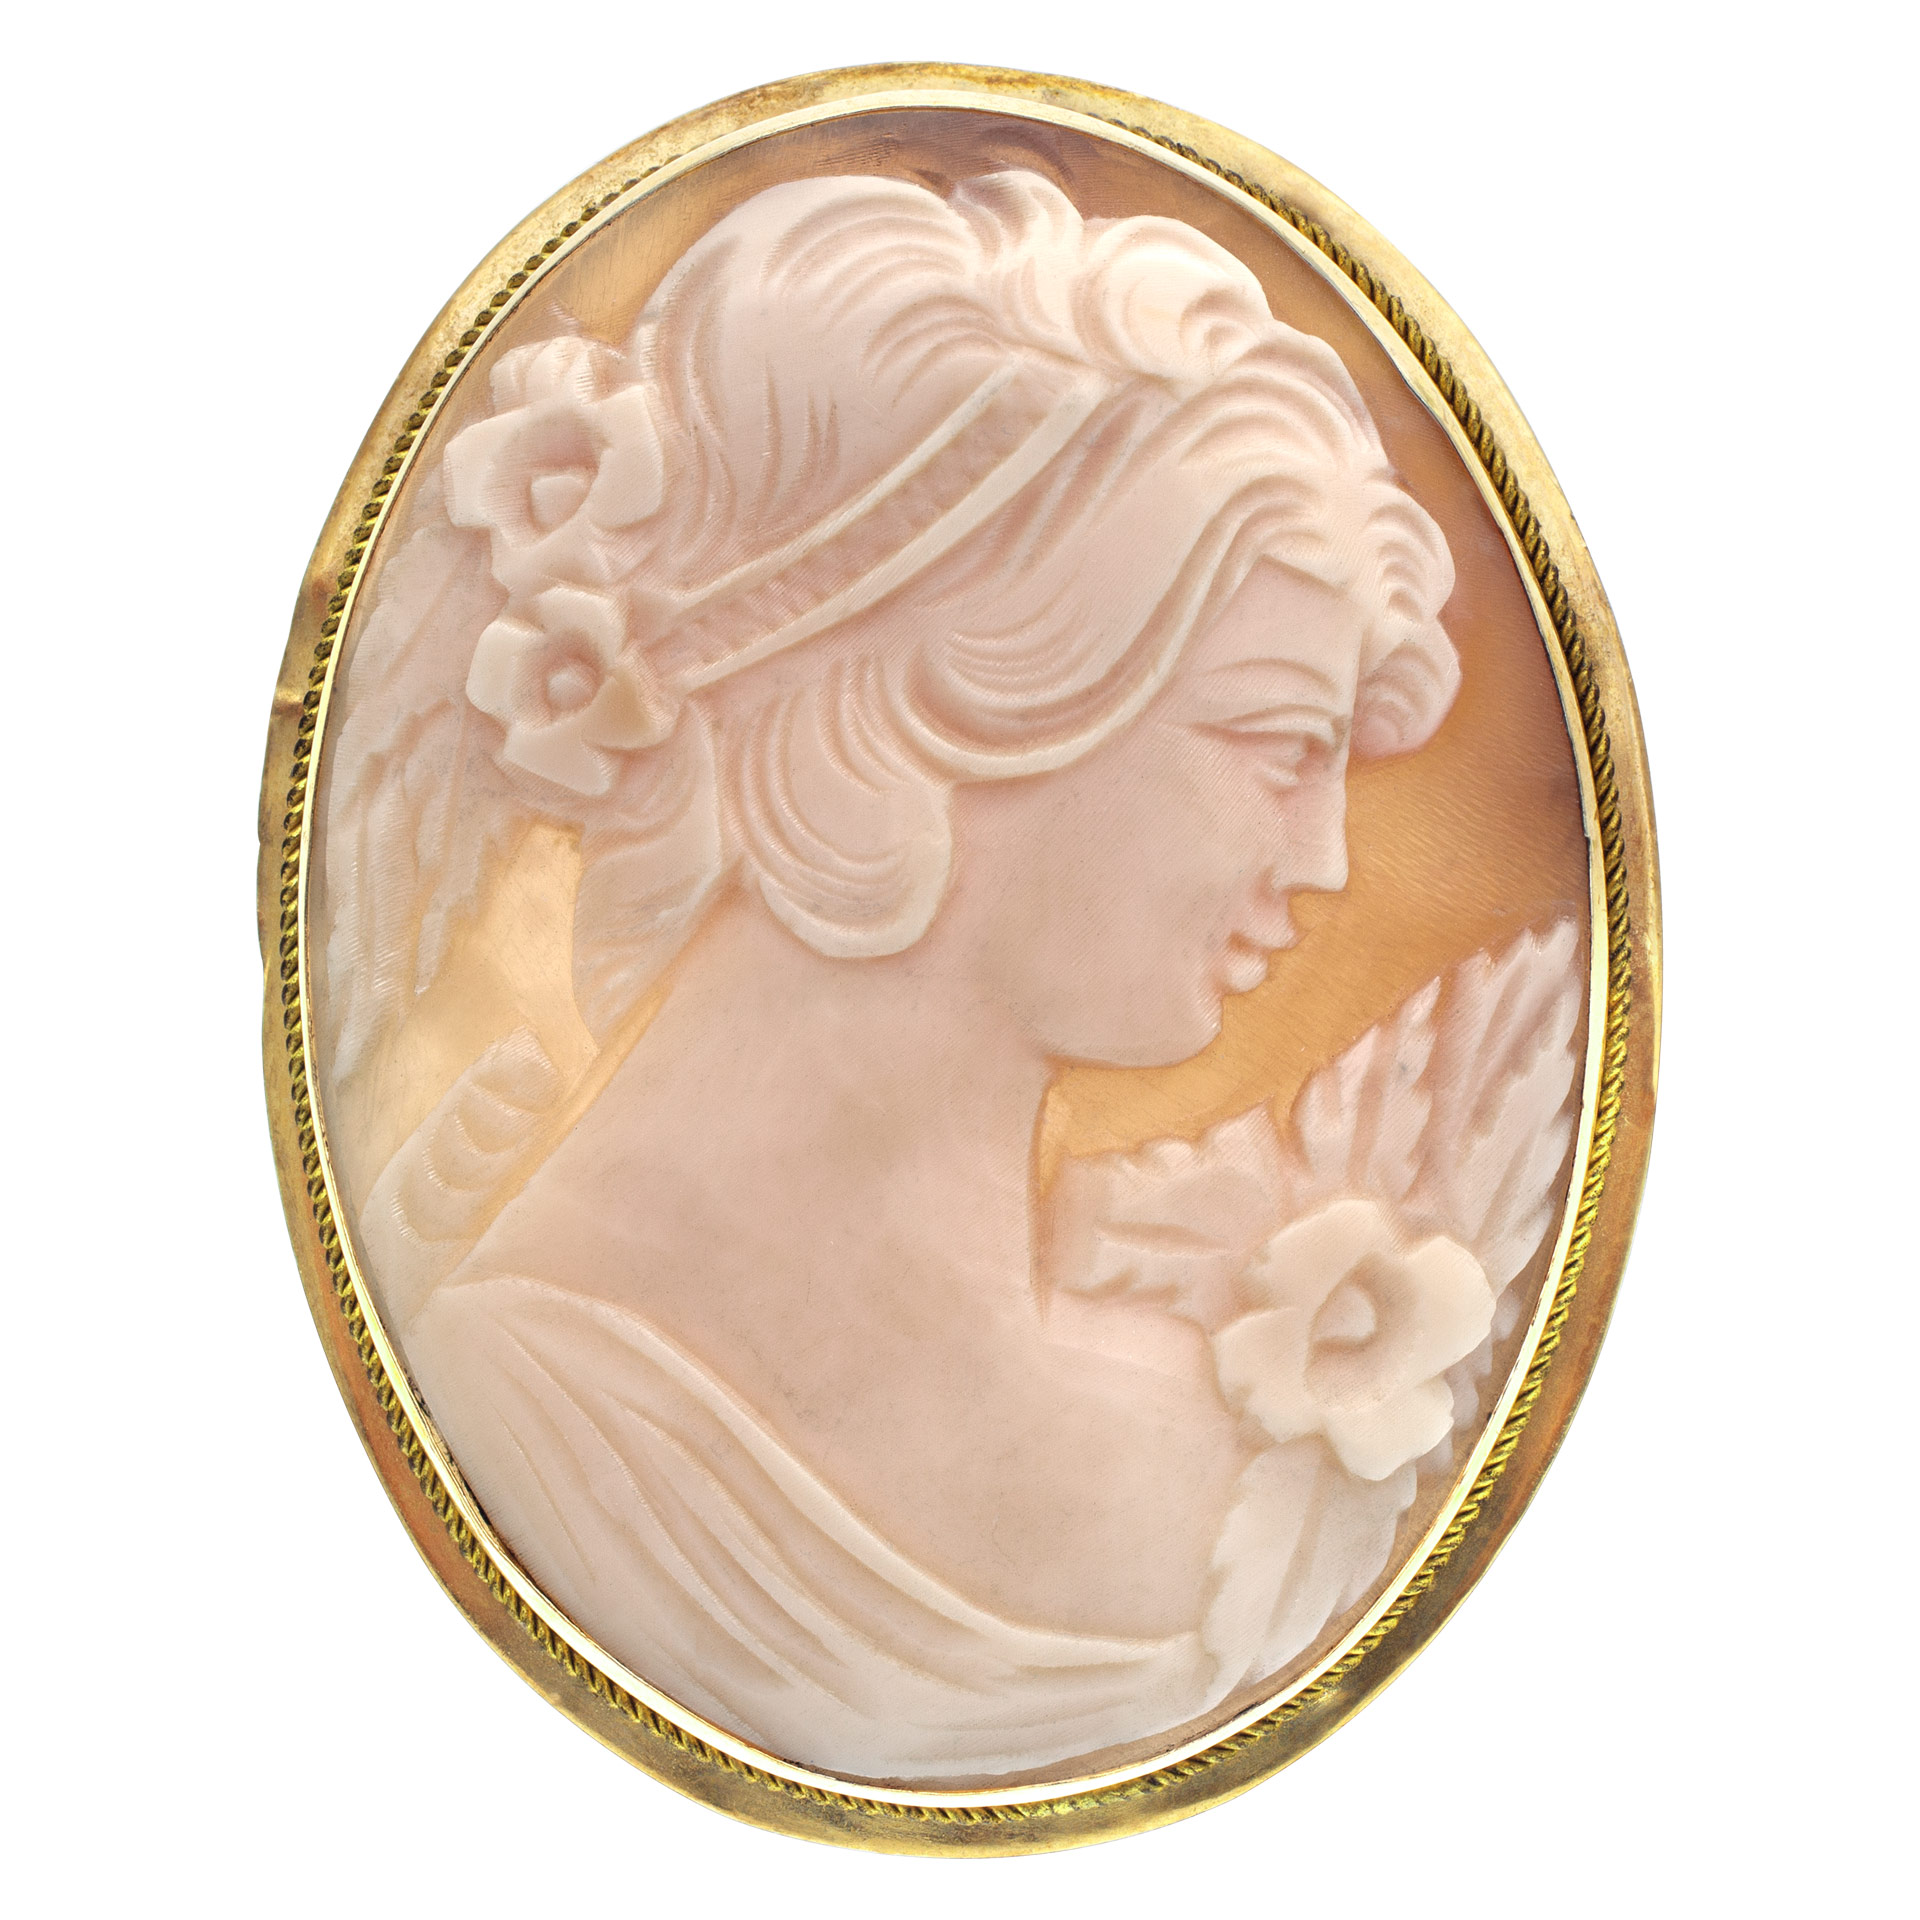 Victorian Shell Cameo portrait of a beautiful maiden, broach/pendant set in 14k yellow gold.